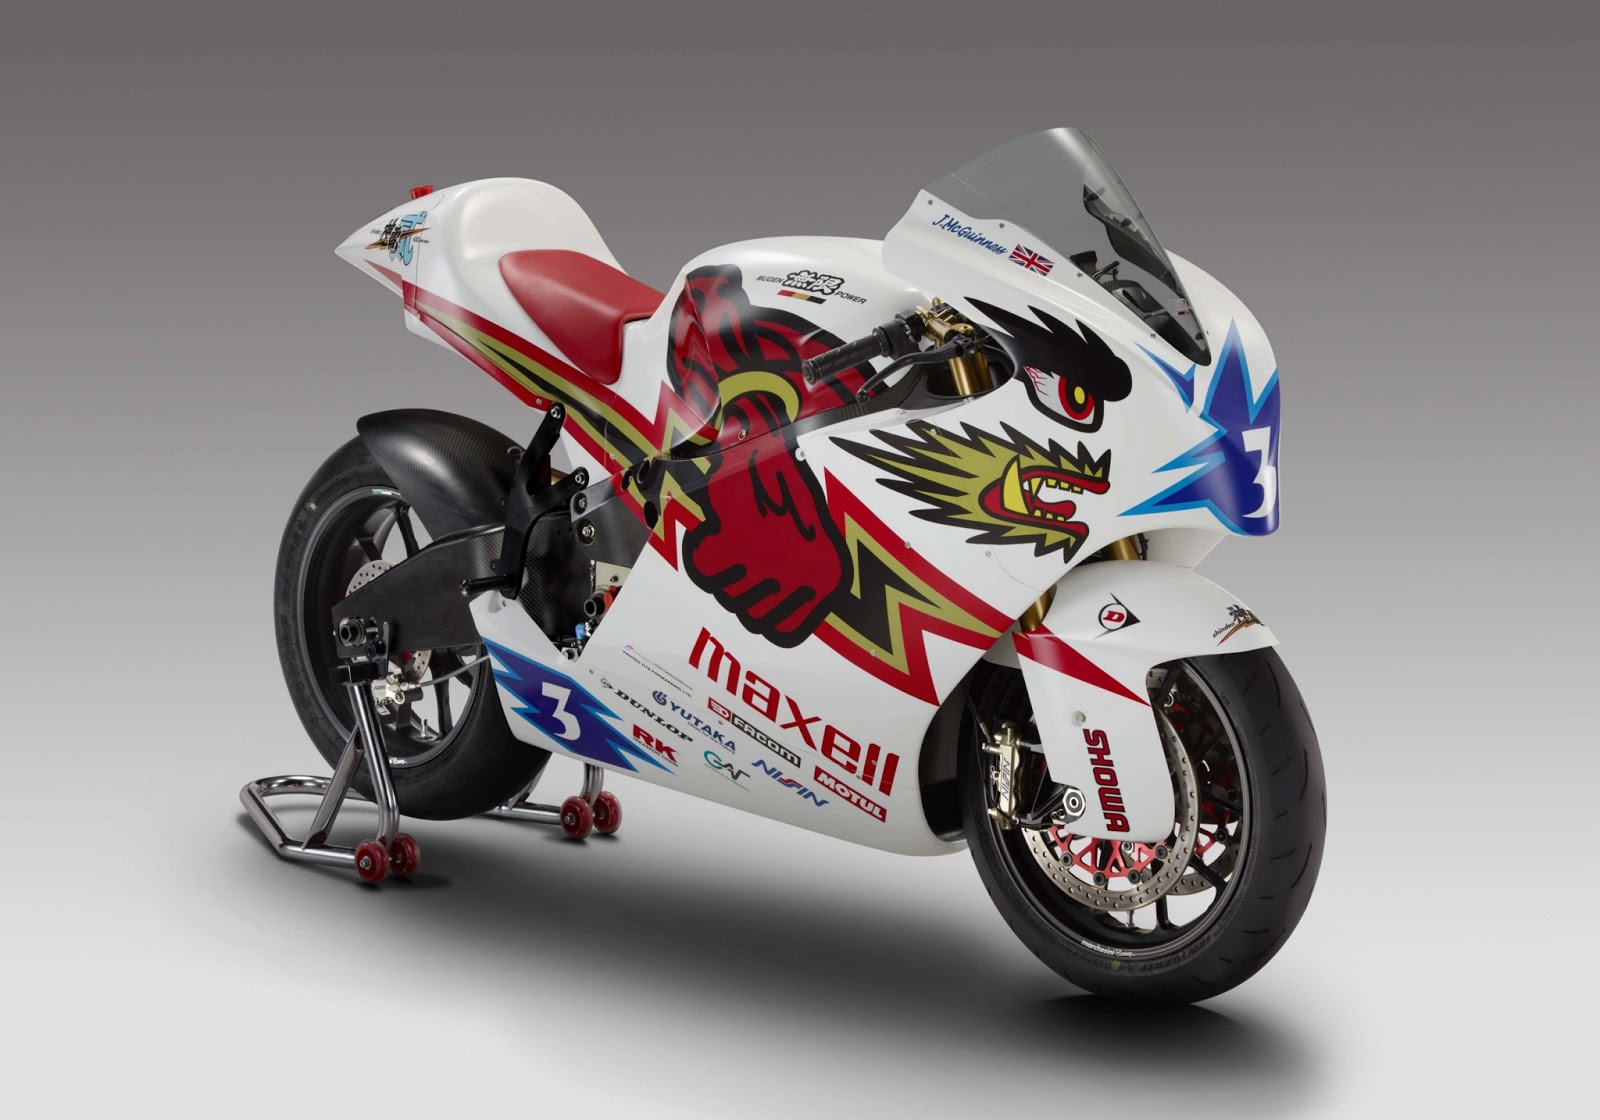 mugen-shinden-ni-ready-to-take-on-the-iomtt_1.jpg